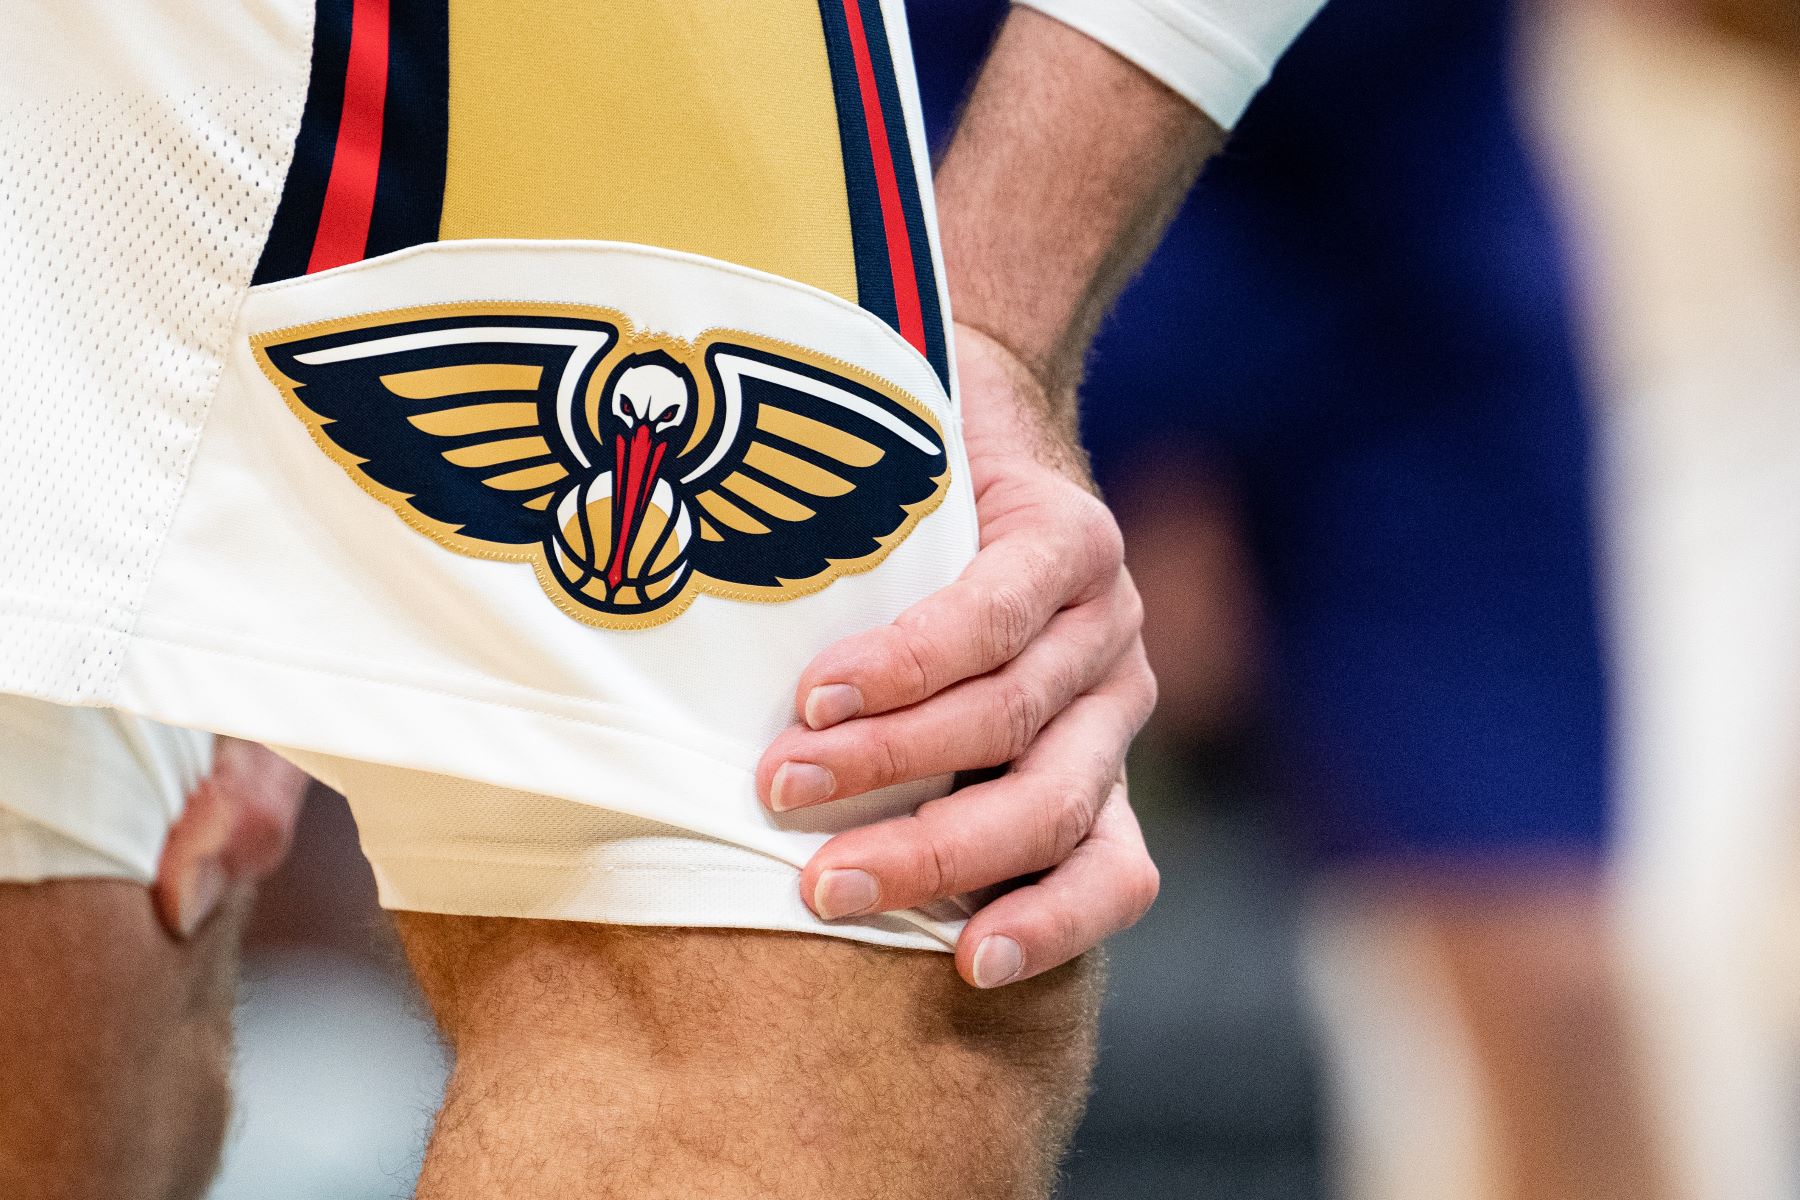 New Orleans Pelicans logo on the shorts of #17 Jonas Valanciunas during a game against the Charlotte Hornets